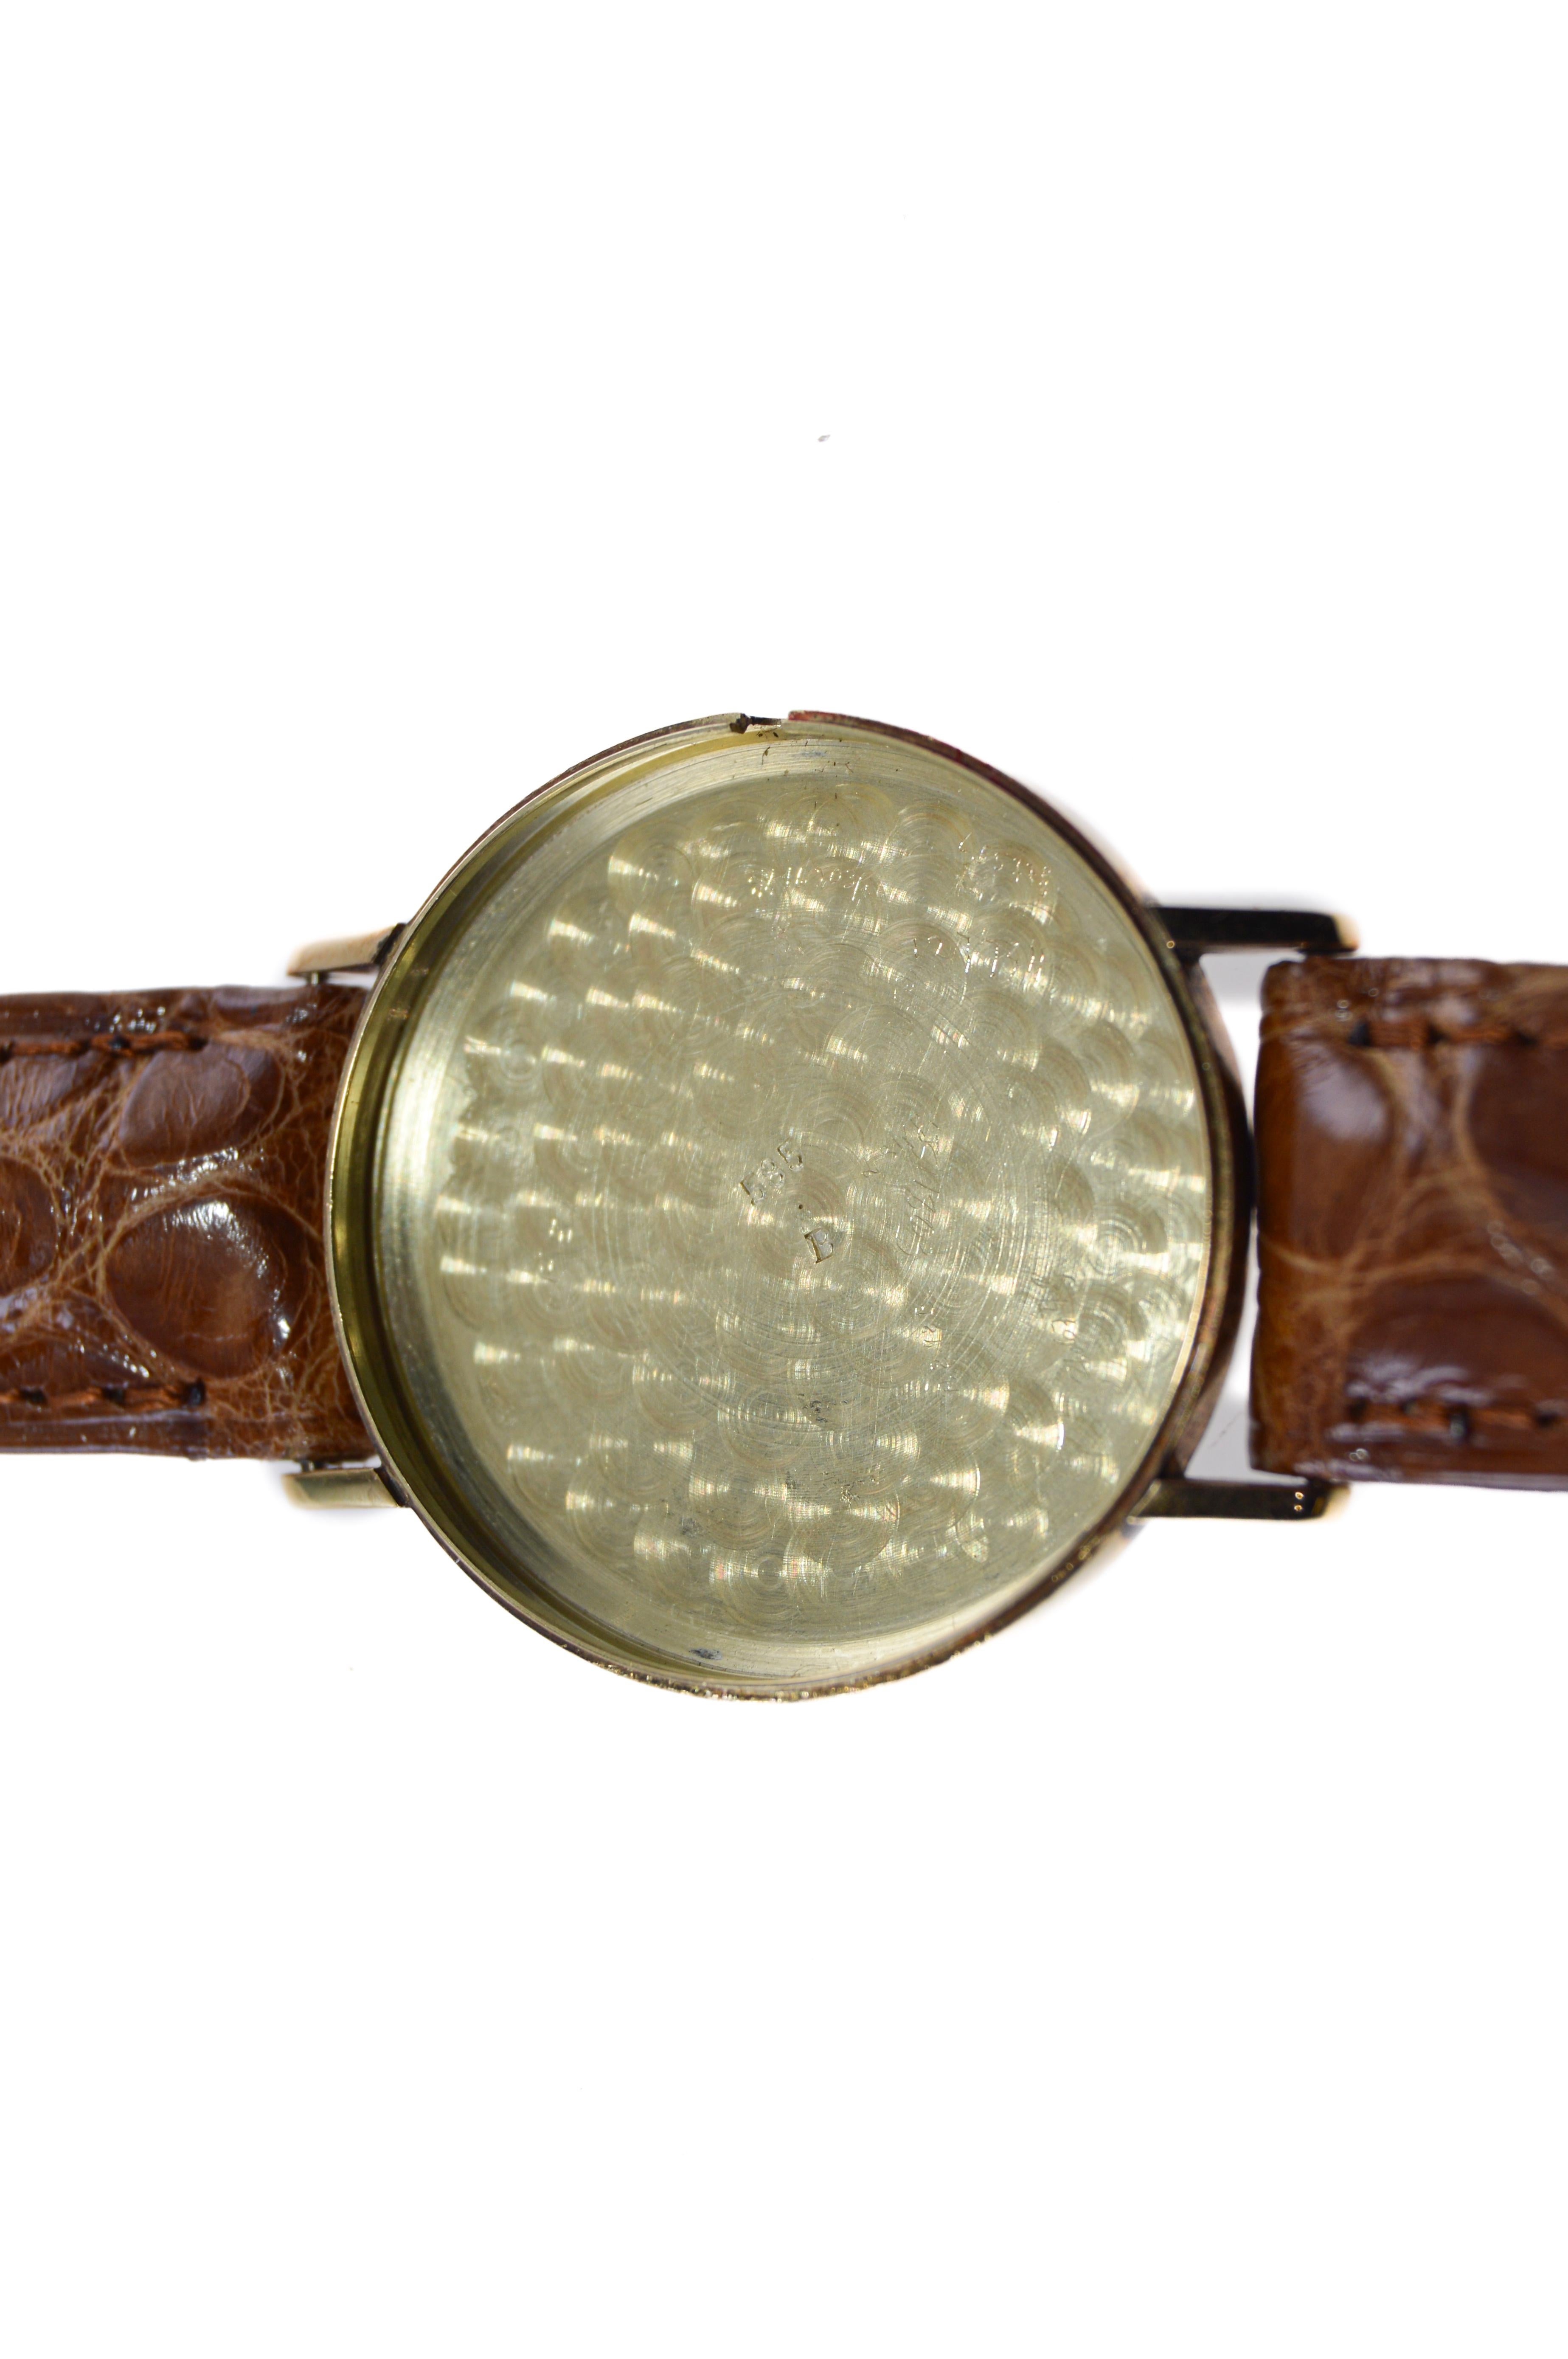 Tiffany & Co. 14 Karat Solid Yellow Gold Vintage Watch, circa 1930s For Sale 4